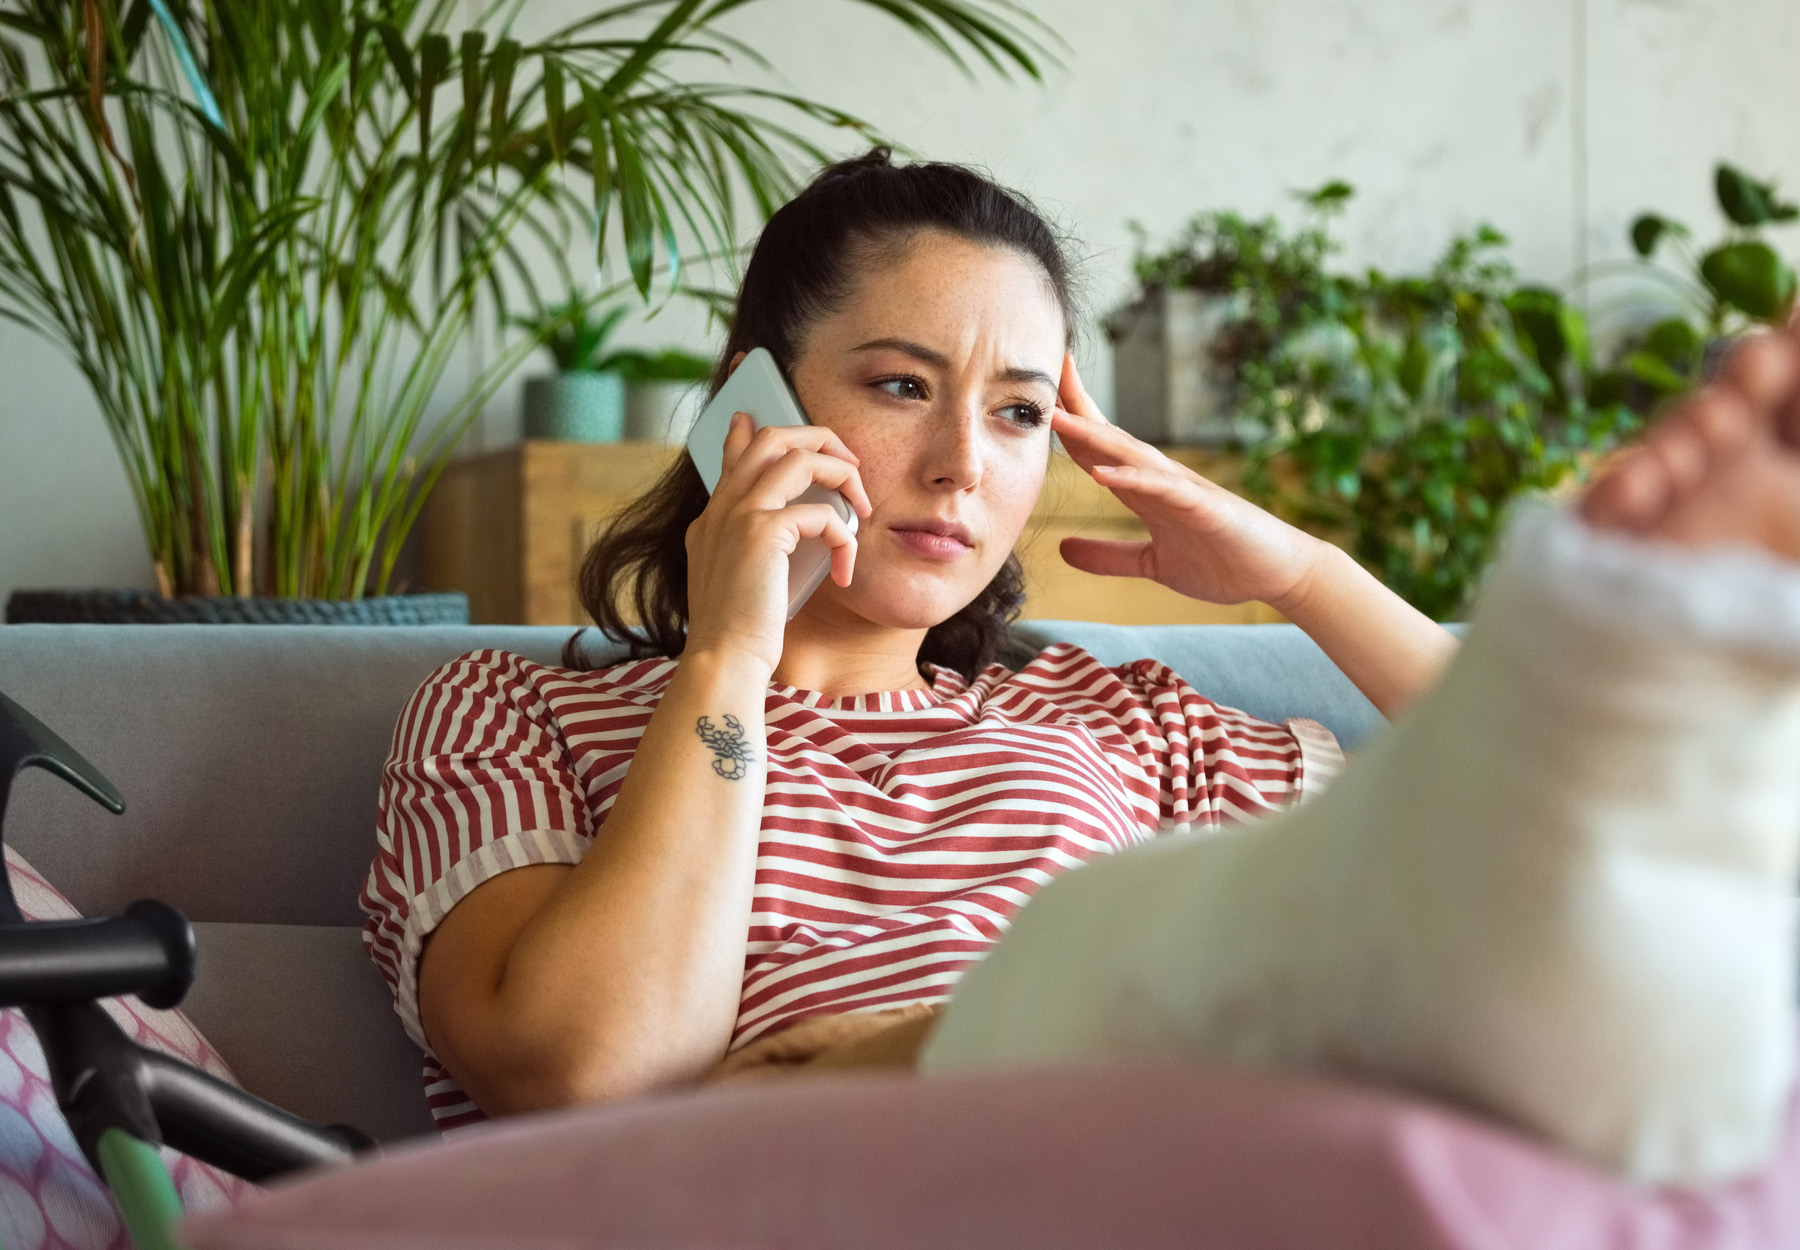 A woman sitting on the couch with her leg propped up in a cast. She is on her cellphone and has a worried look on her face as she just got a surprise medical bill. Stock photo.